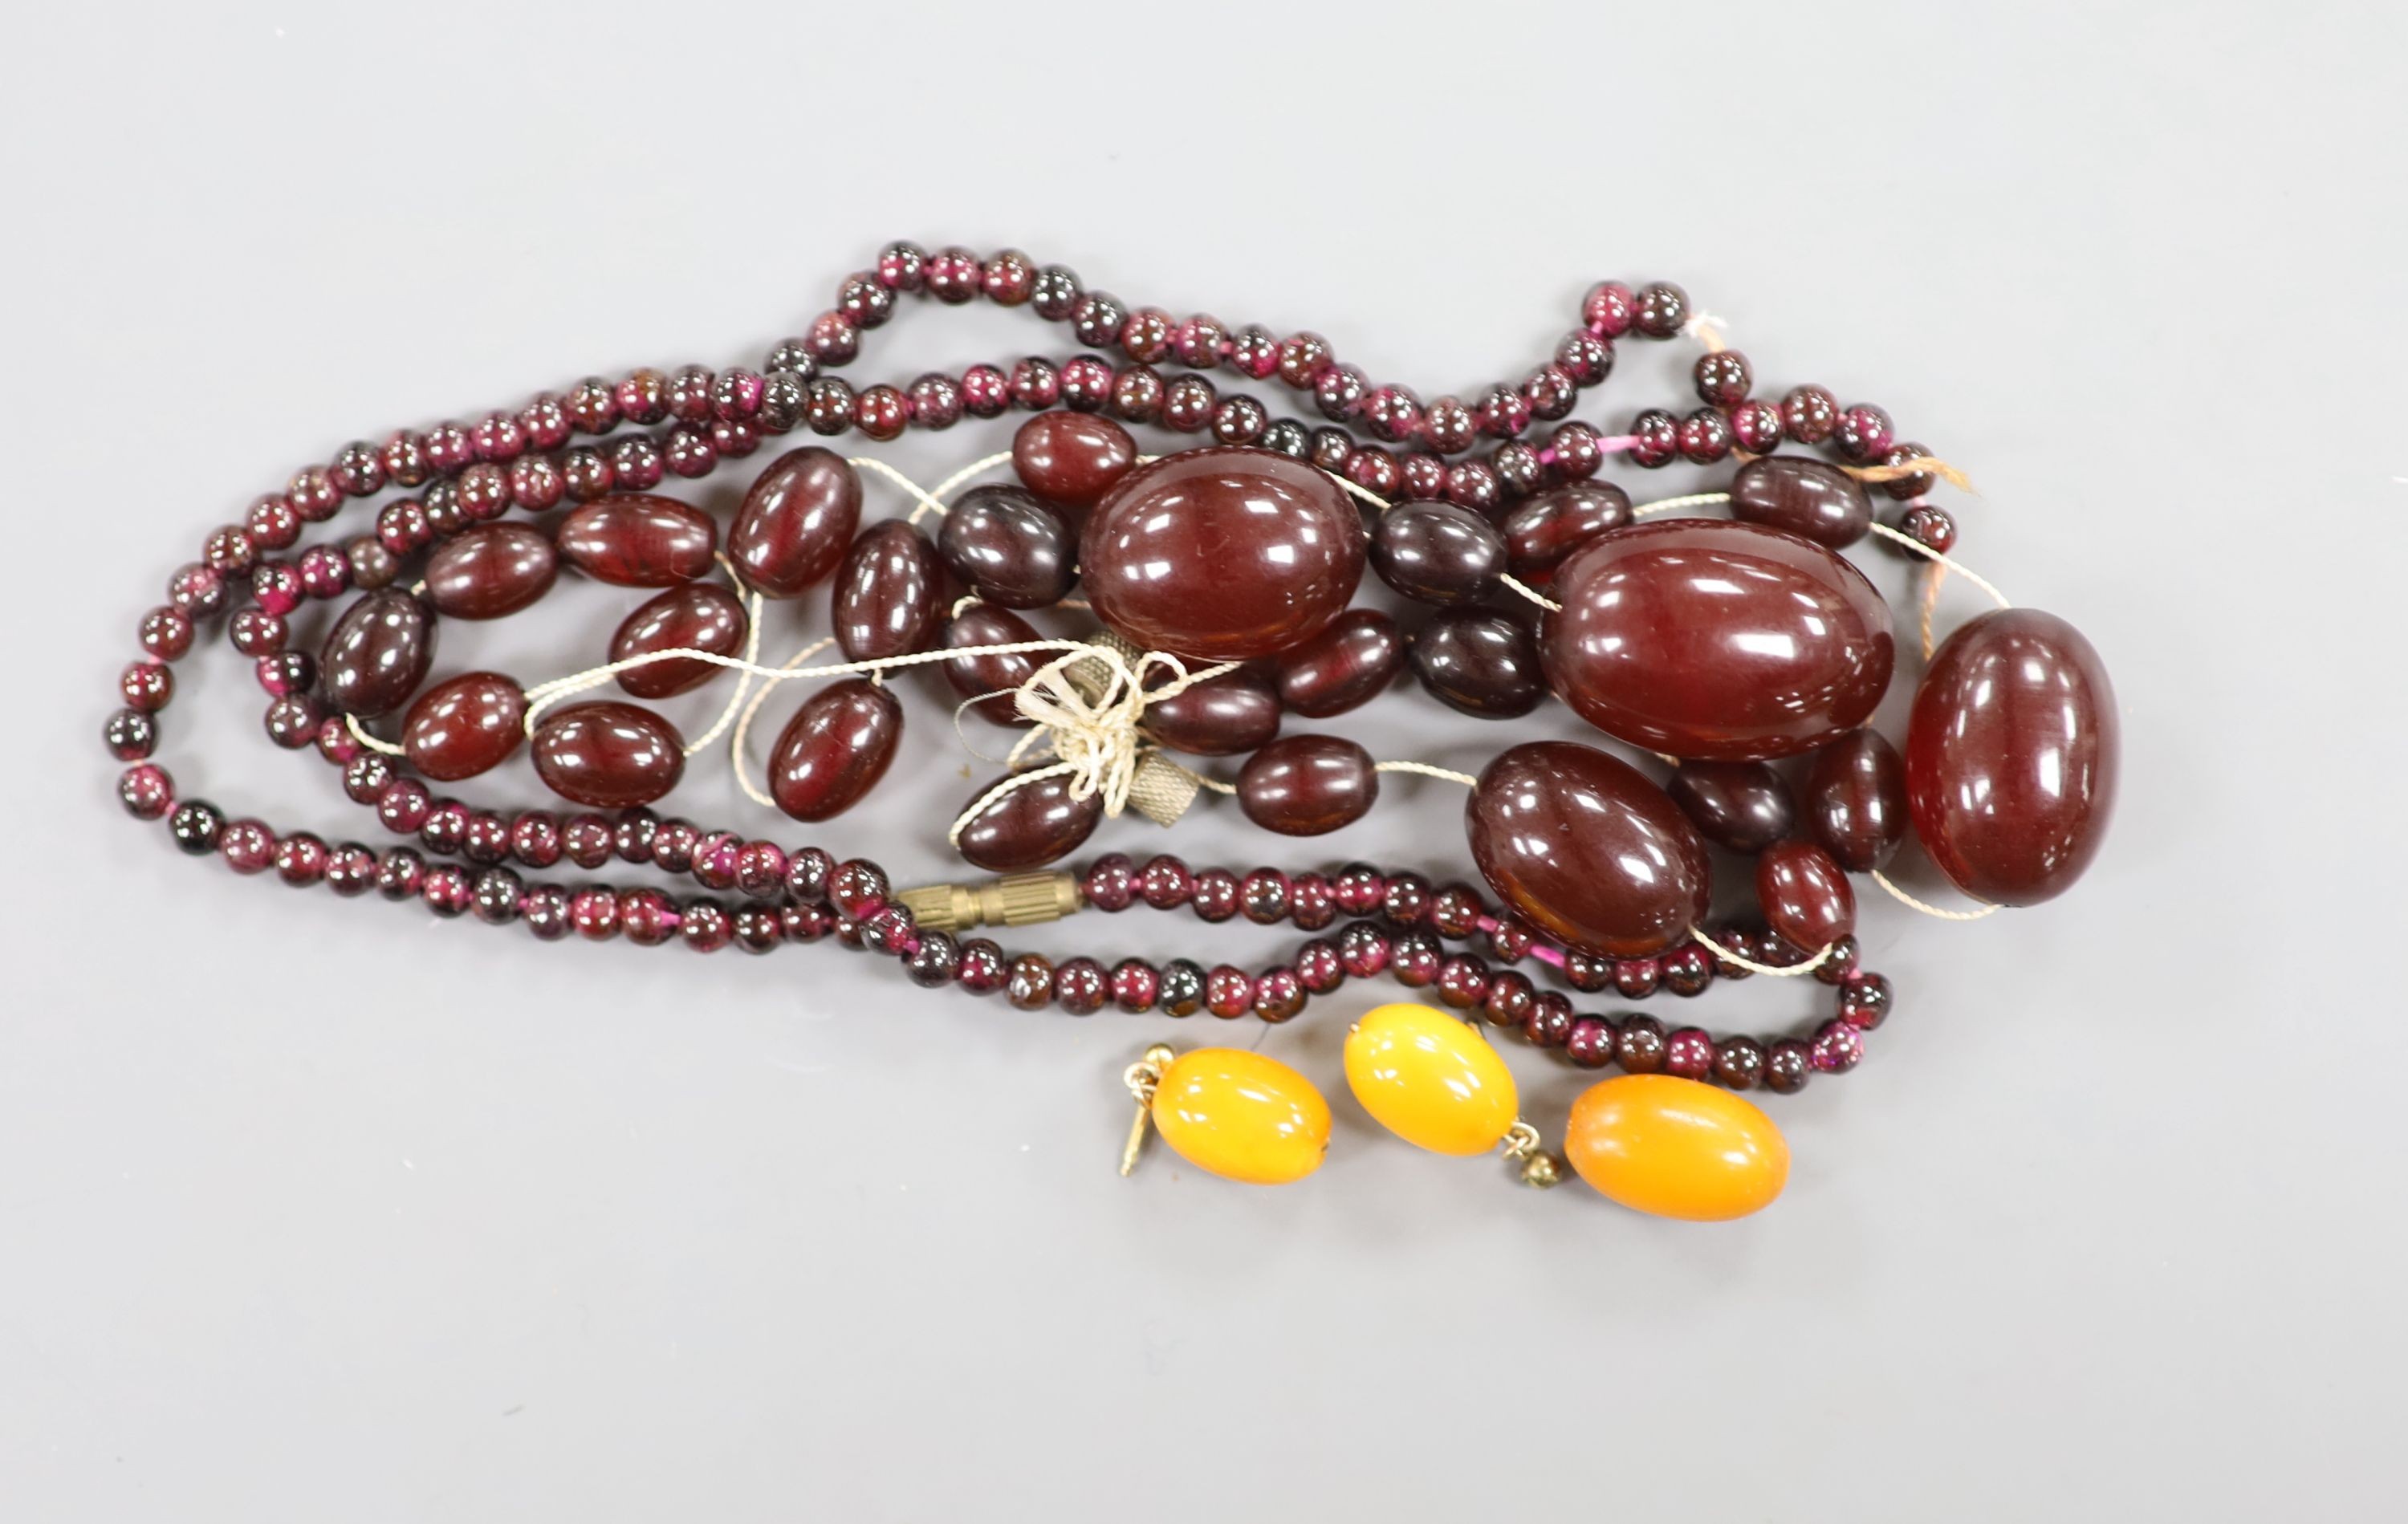 A pair of amber earrings, some loose simulated amber beads and a garnet bead necklace.